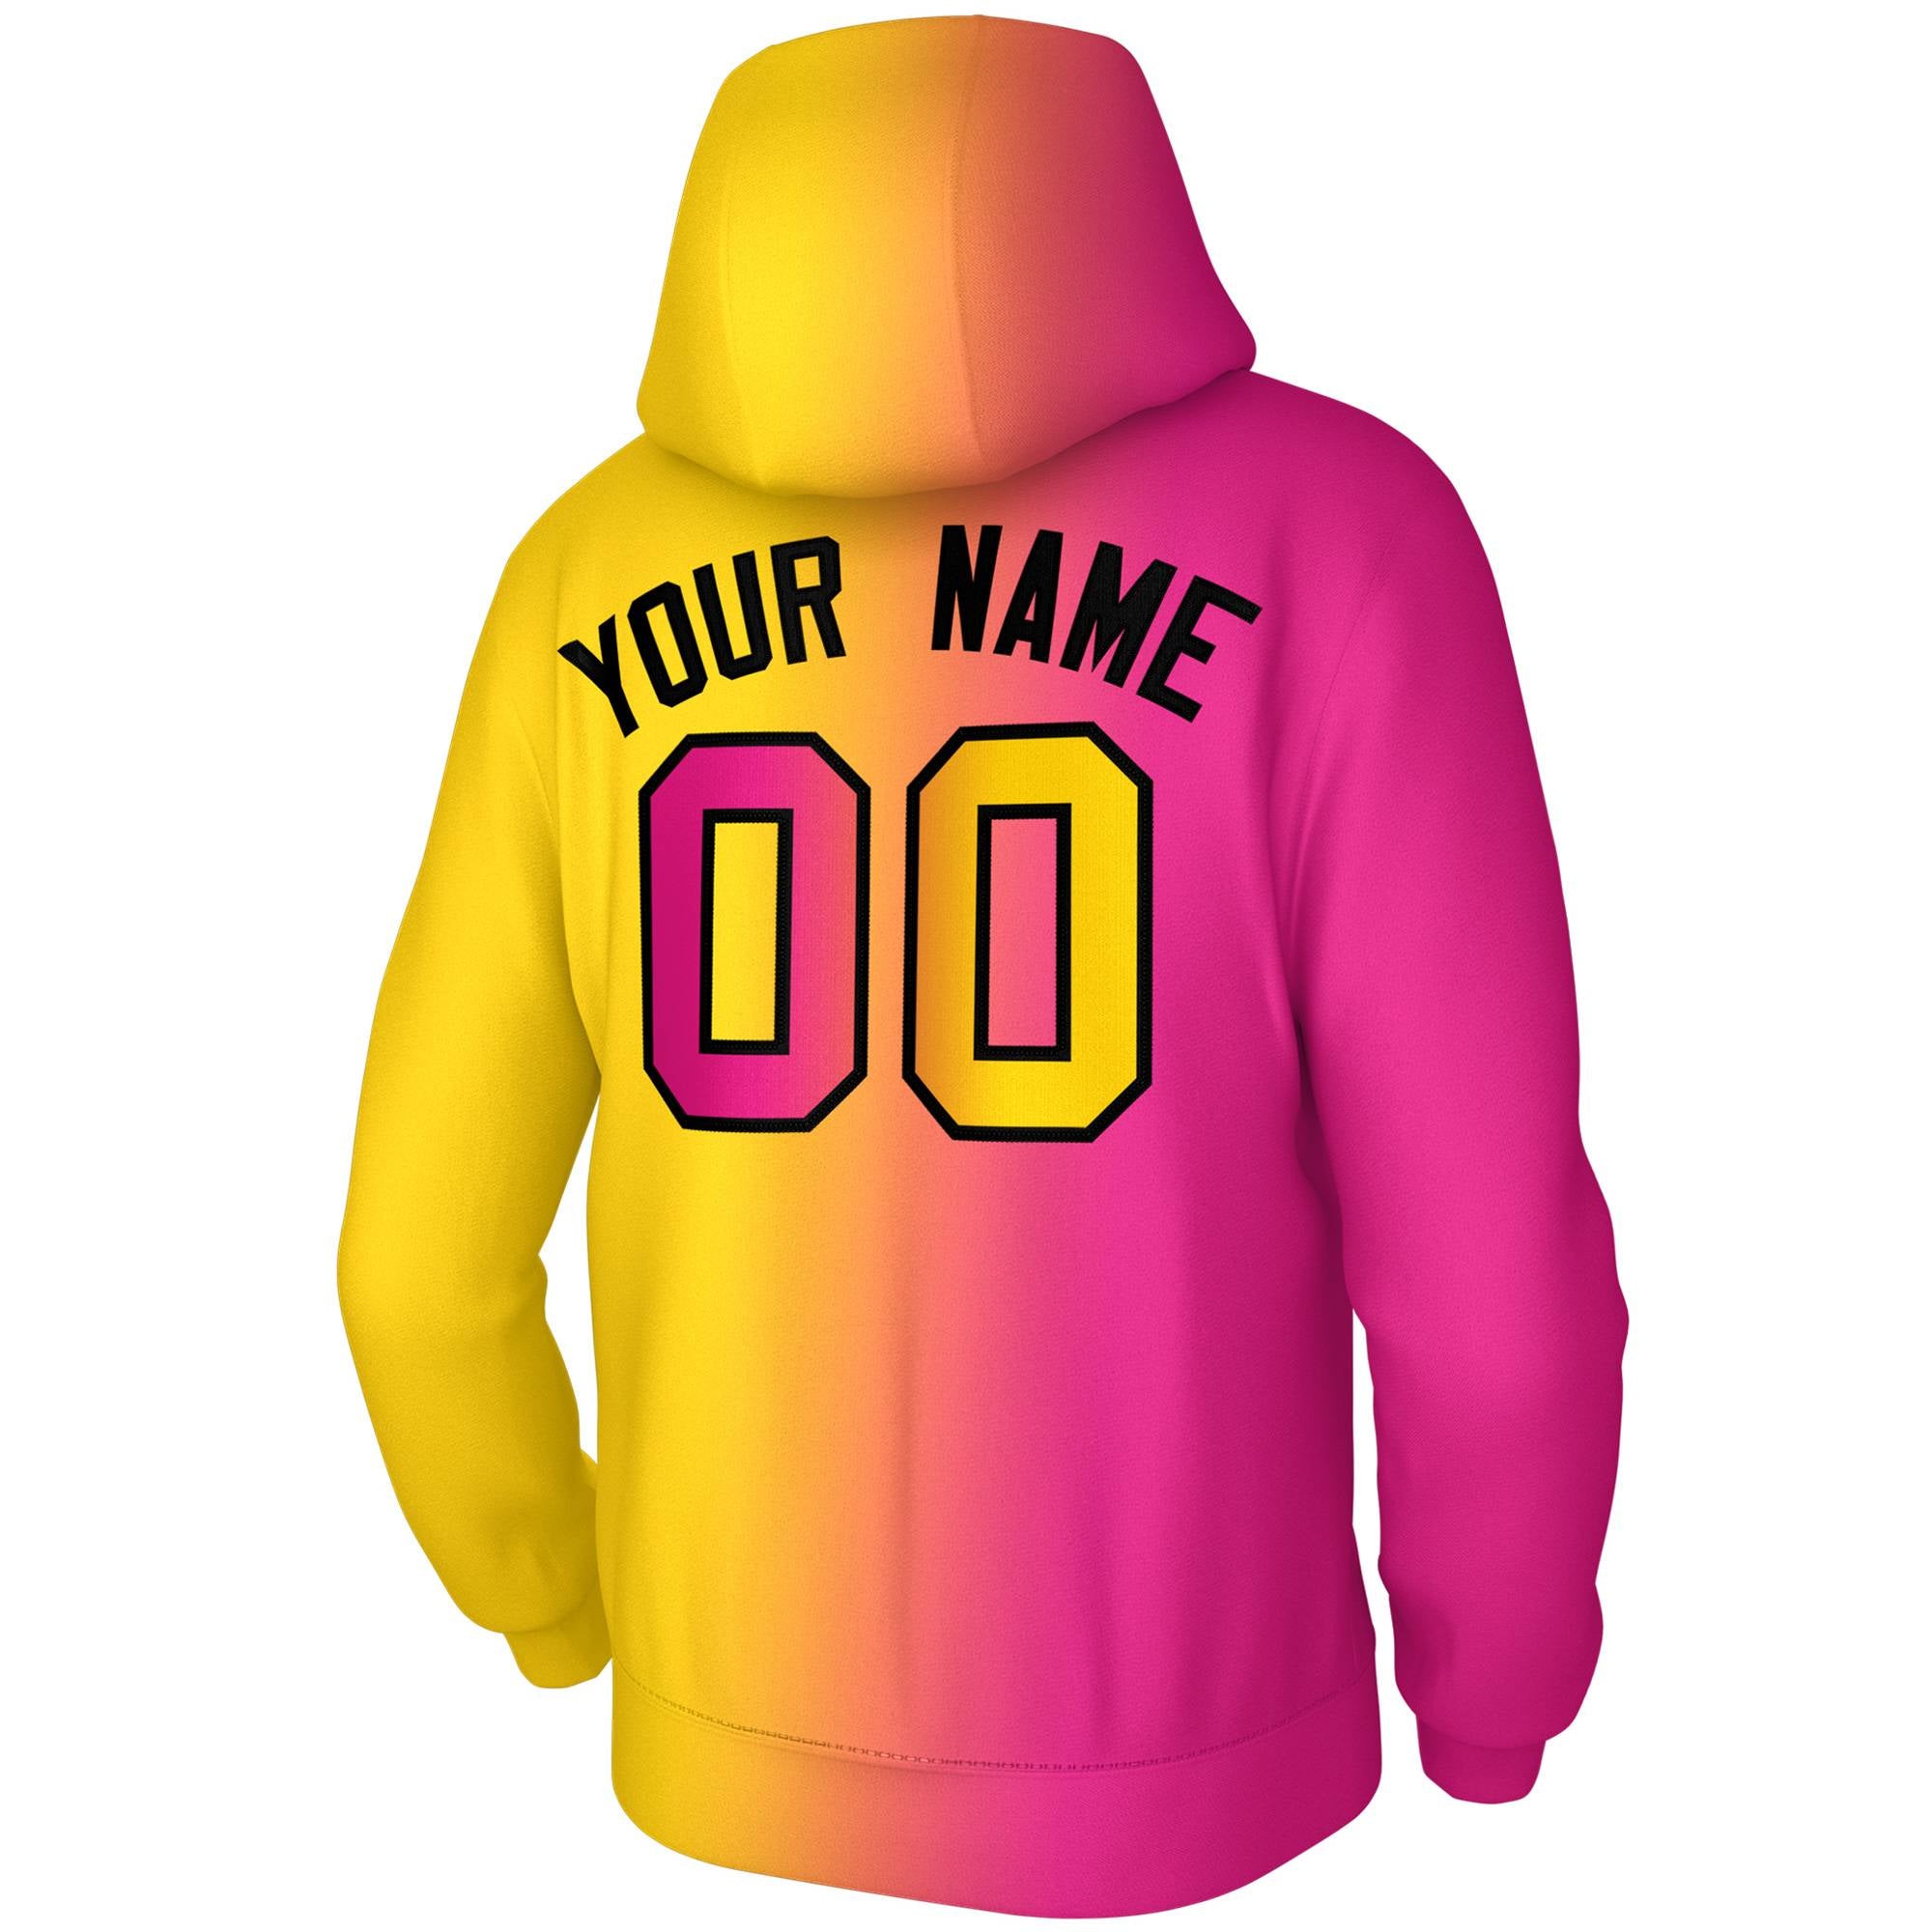 customizable best quality pullover hooded tops mens